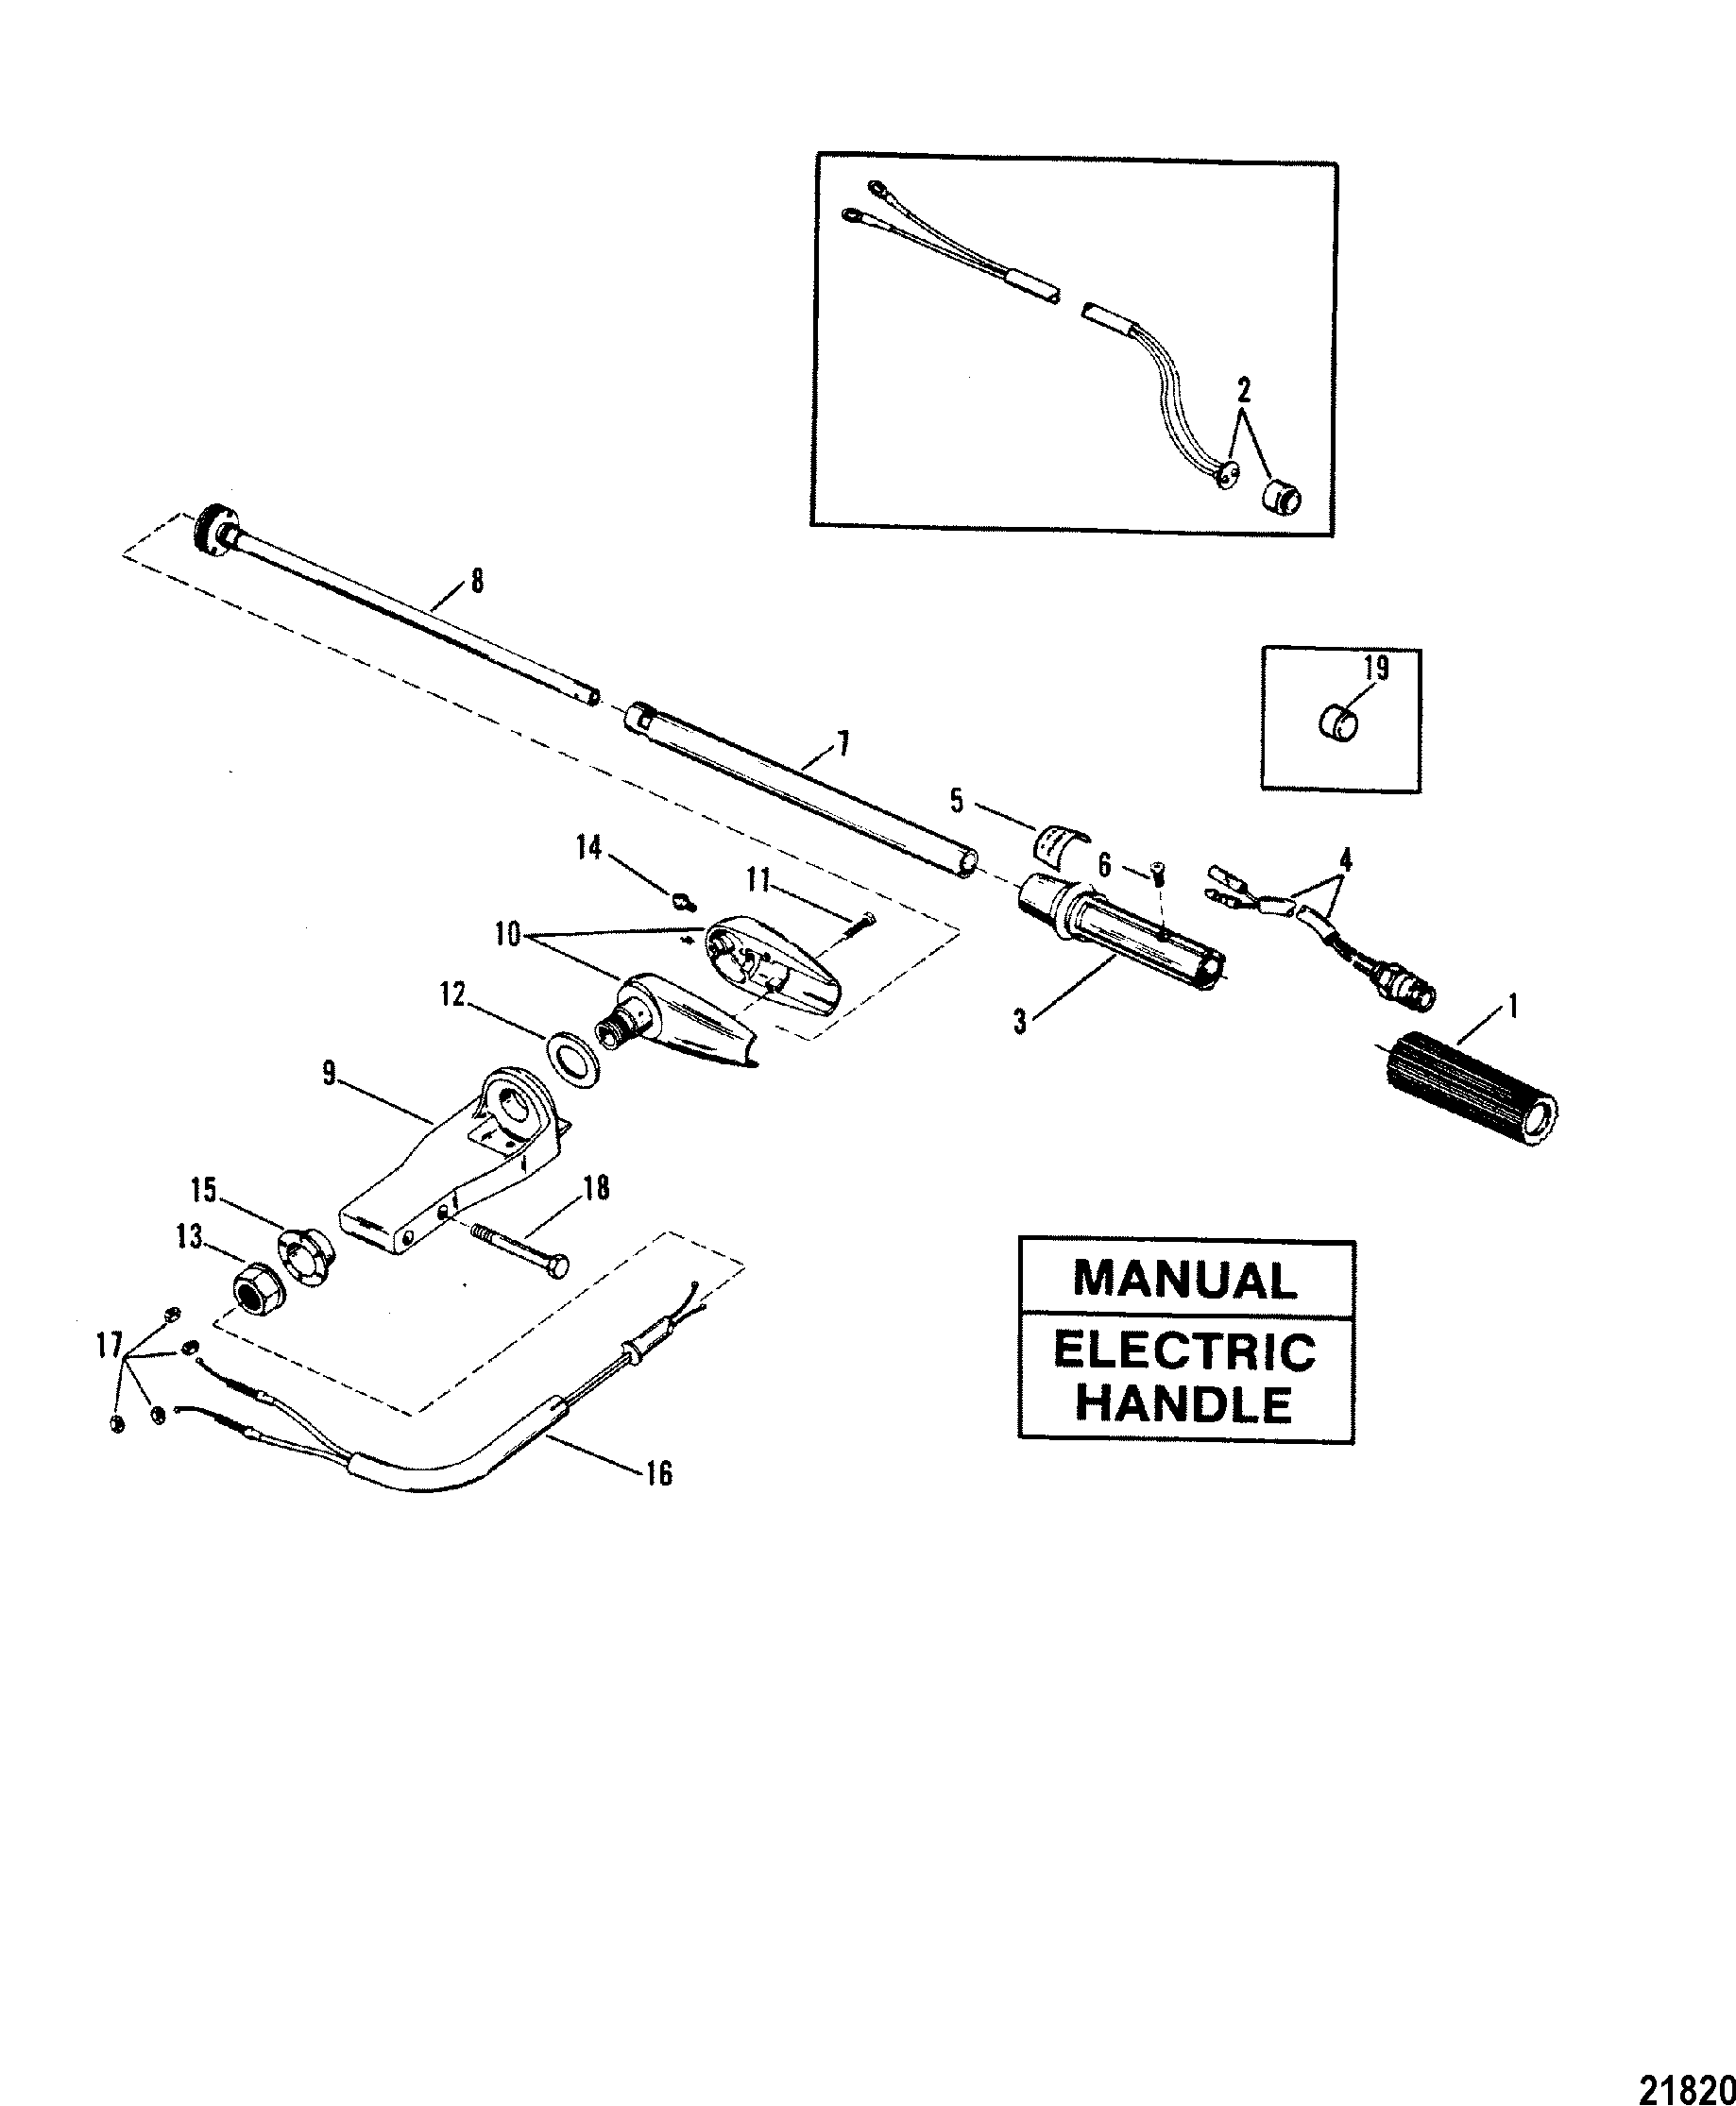 Steering Handle Assembly(Manual/Electric Handle)